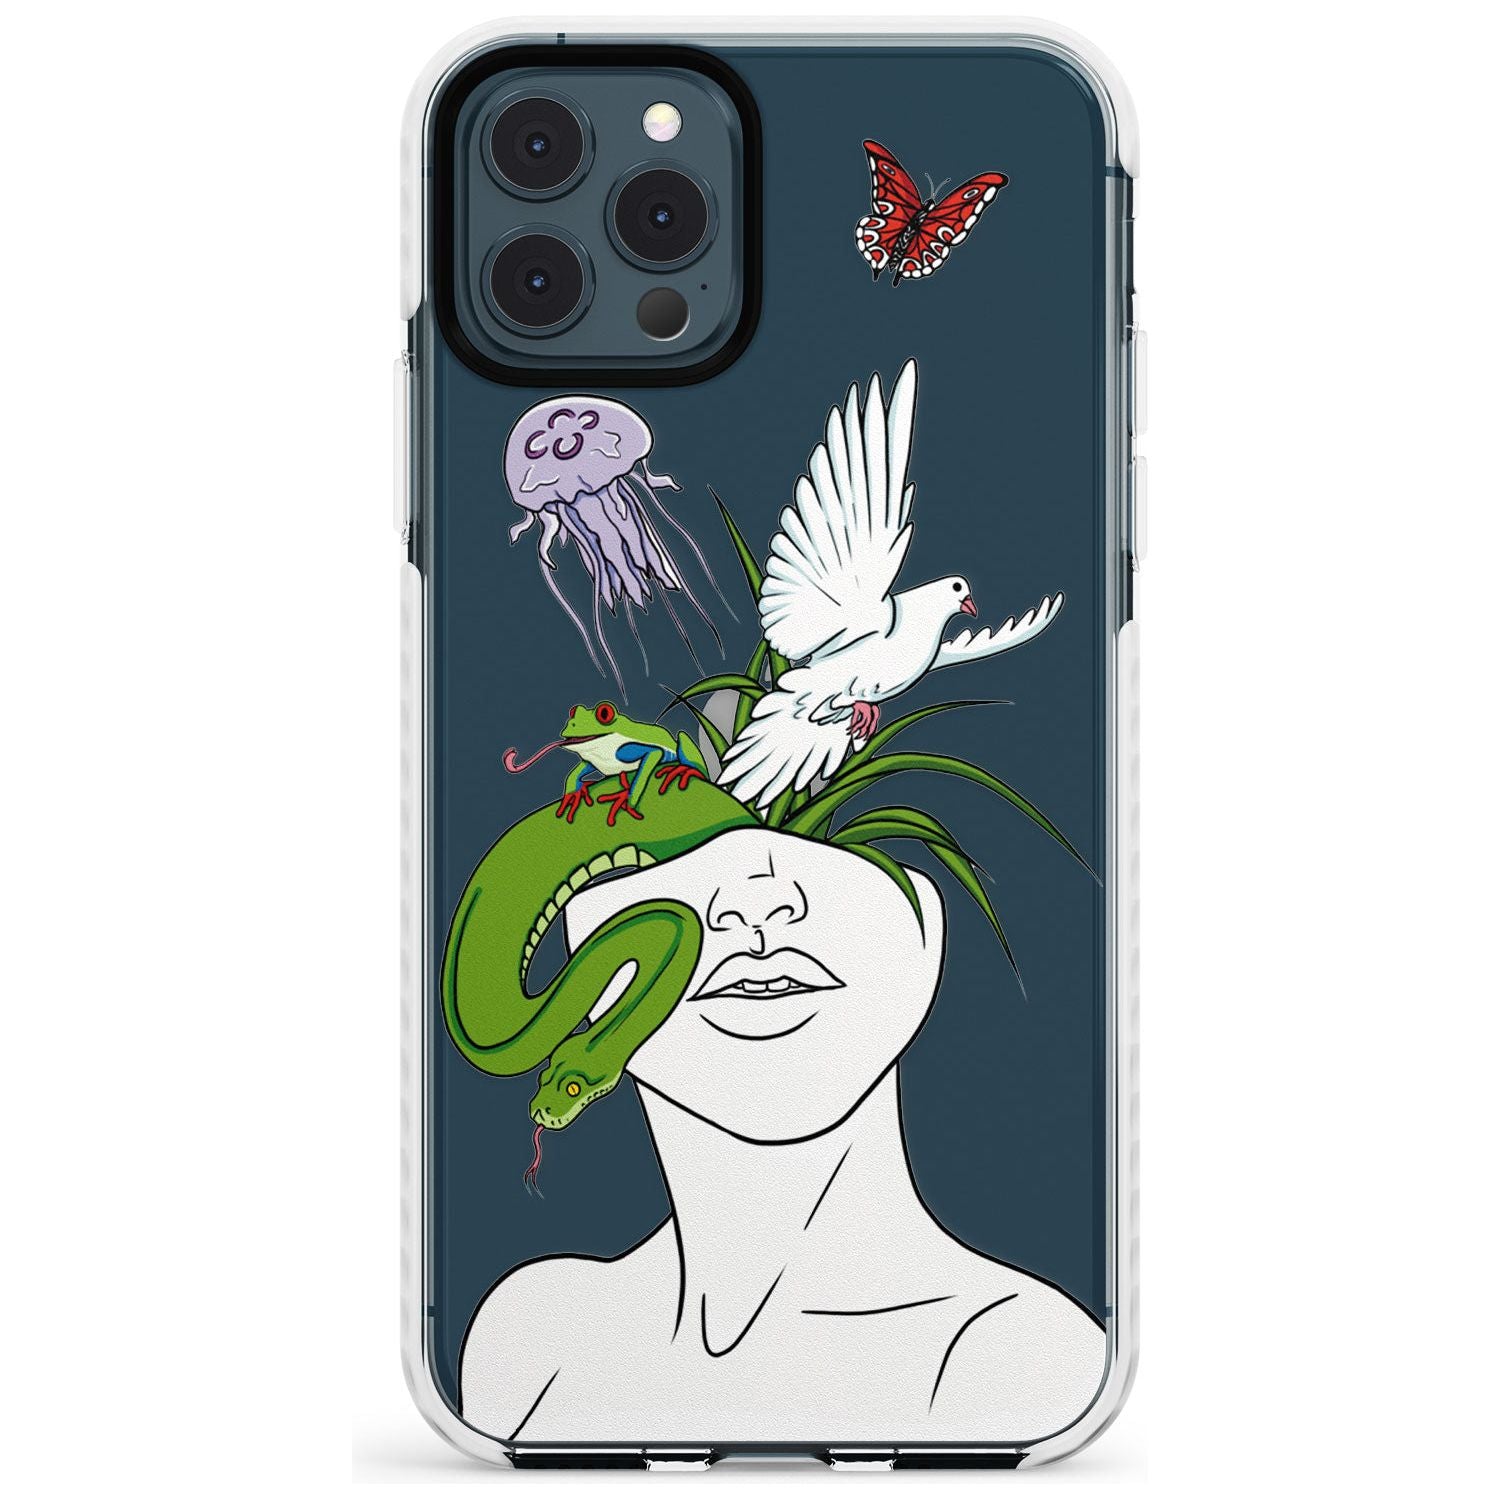 WILD THOUGHTS Slim TPU Phone Case for iPhone 11 Pro Max